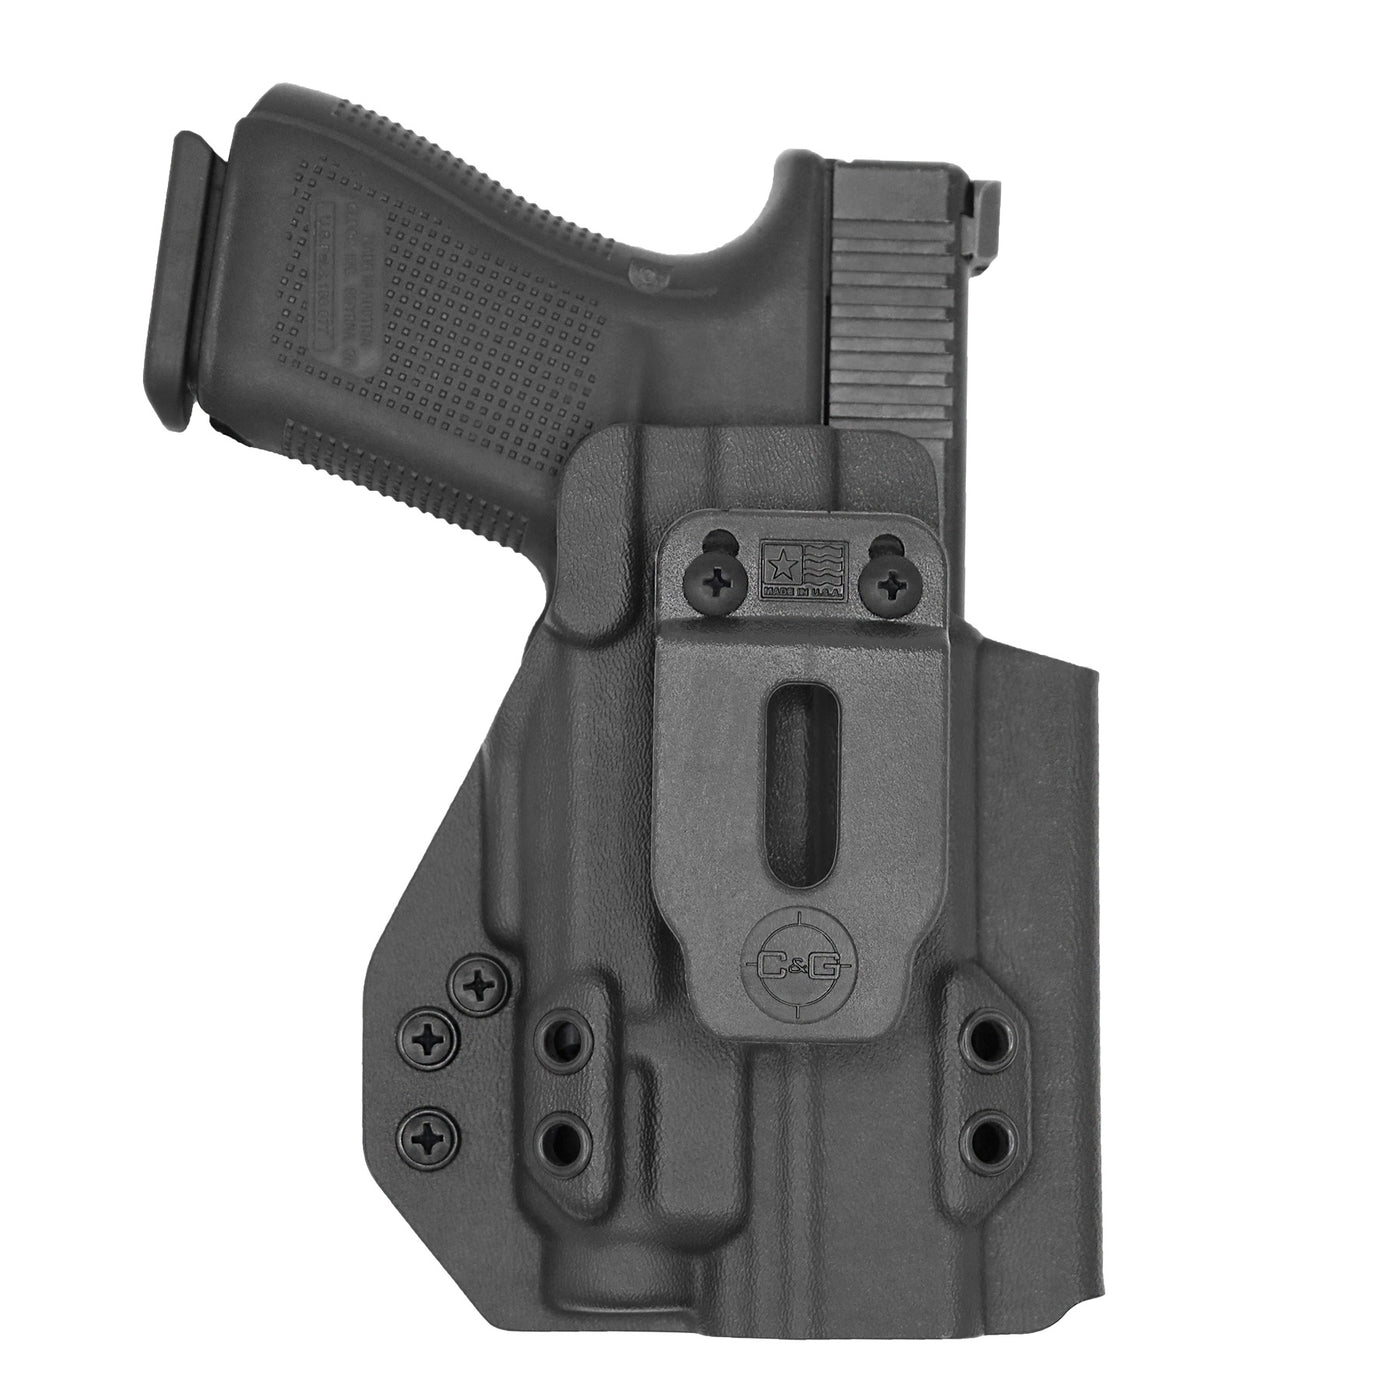 C&G Holsters custom IWB Tactical Glock 20/21 Streamlight TLR7/a in holstered position